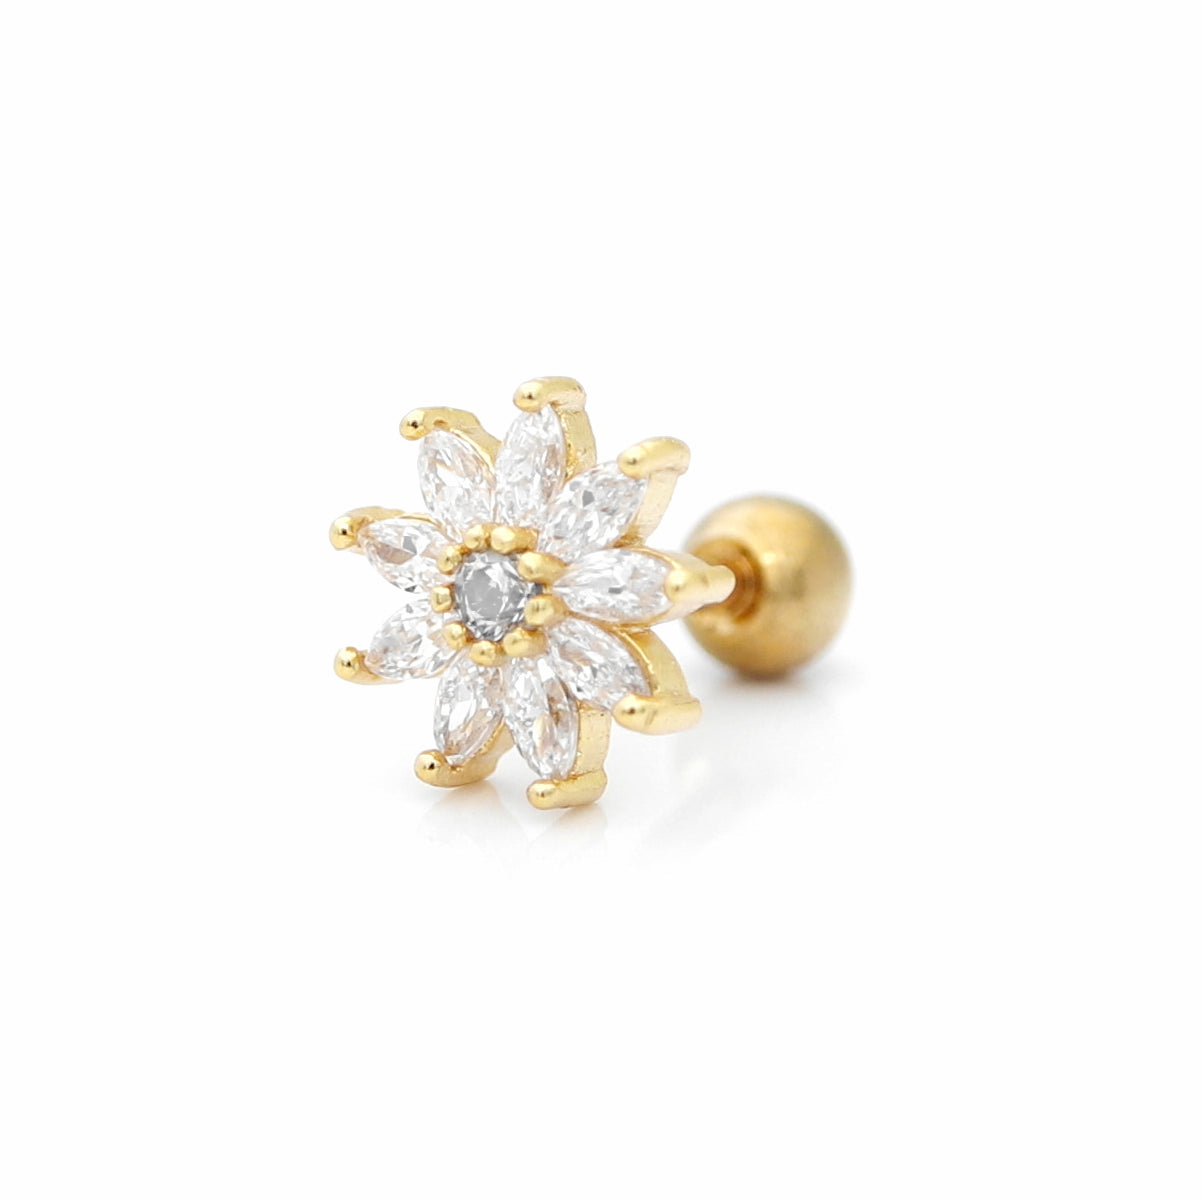 C.Z Pave Flower Cartilage Tragus Piercing Earring - Gold-Body Piercing Jewellery, Cartilage, Cubic Zirconia, earrings, Jewellery, Tragus, Women's Earrings, Women's Jewellery-TG0024-g3-Glitters